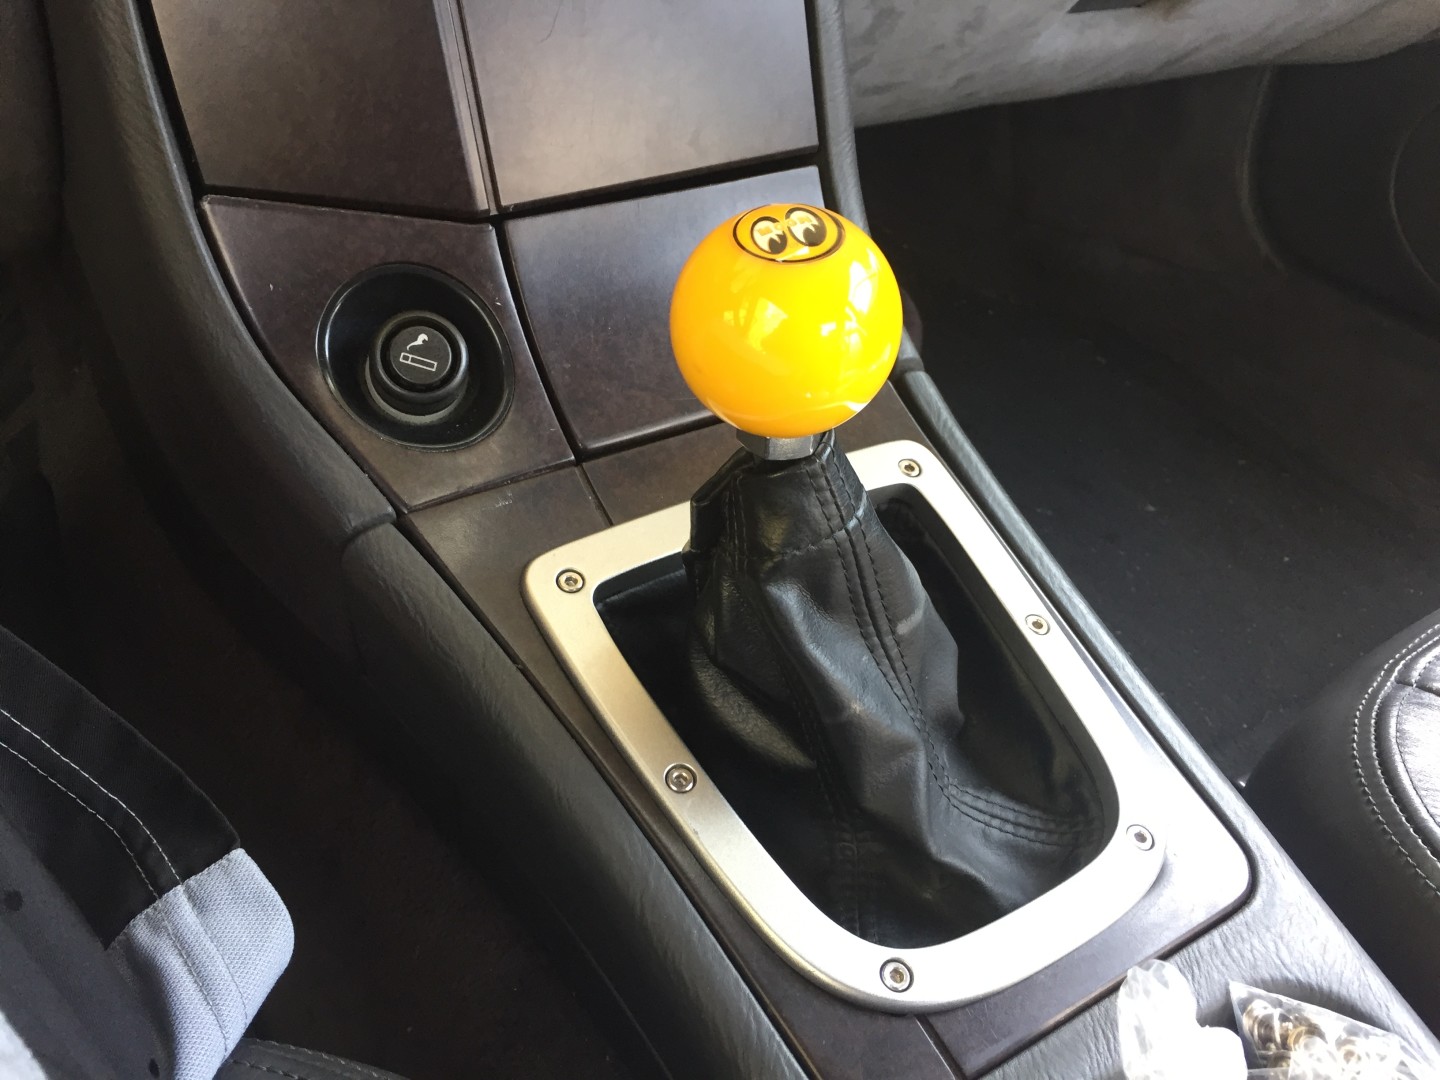 small update from back when. i fitted a bezel to the shift surround and a boot. Later I fixed the boot to fit the shifter diameter.
I've since switched to an STi shift knob.